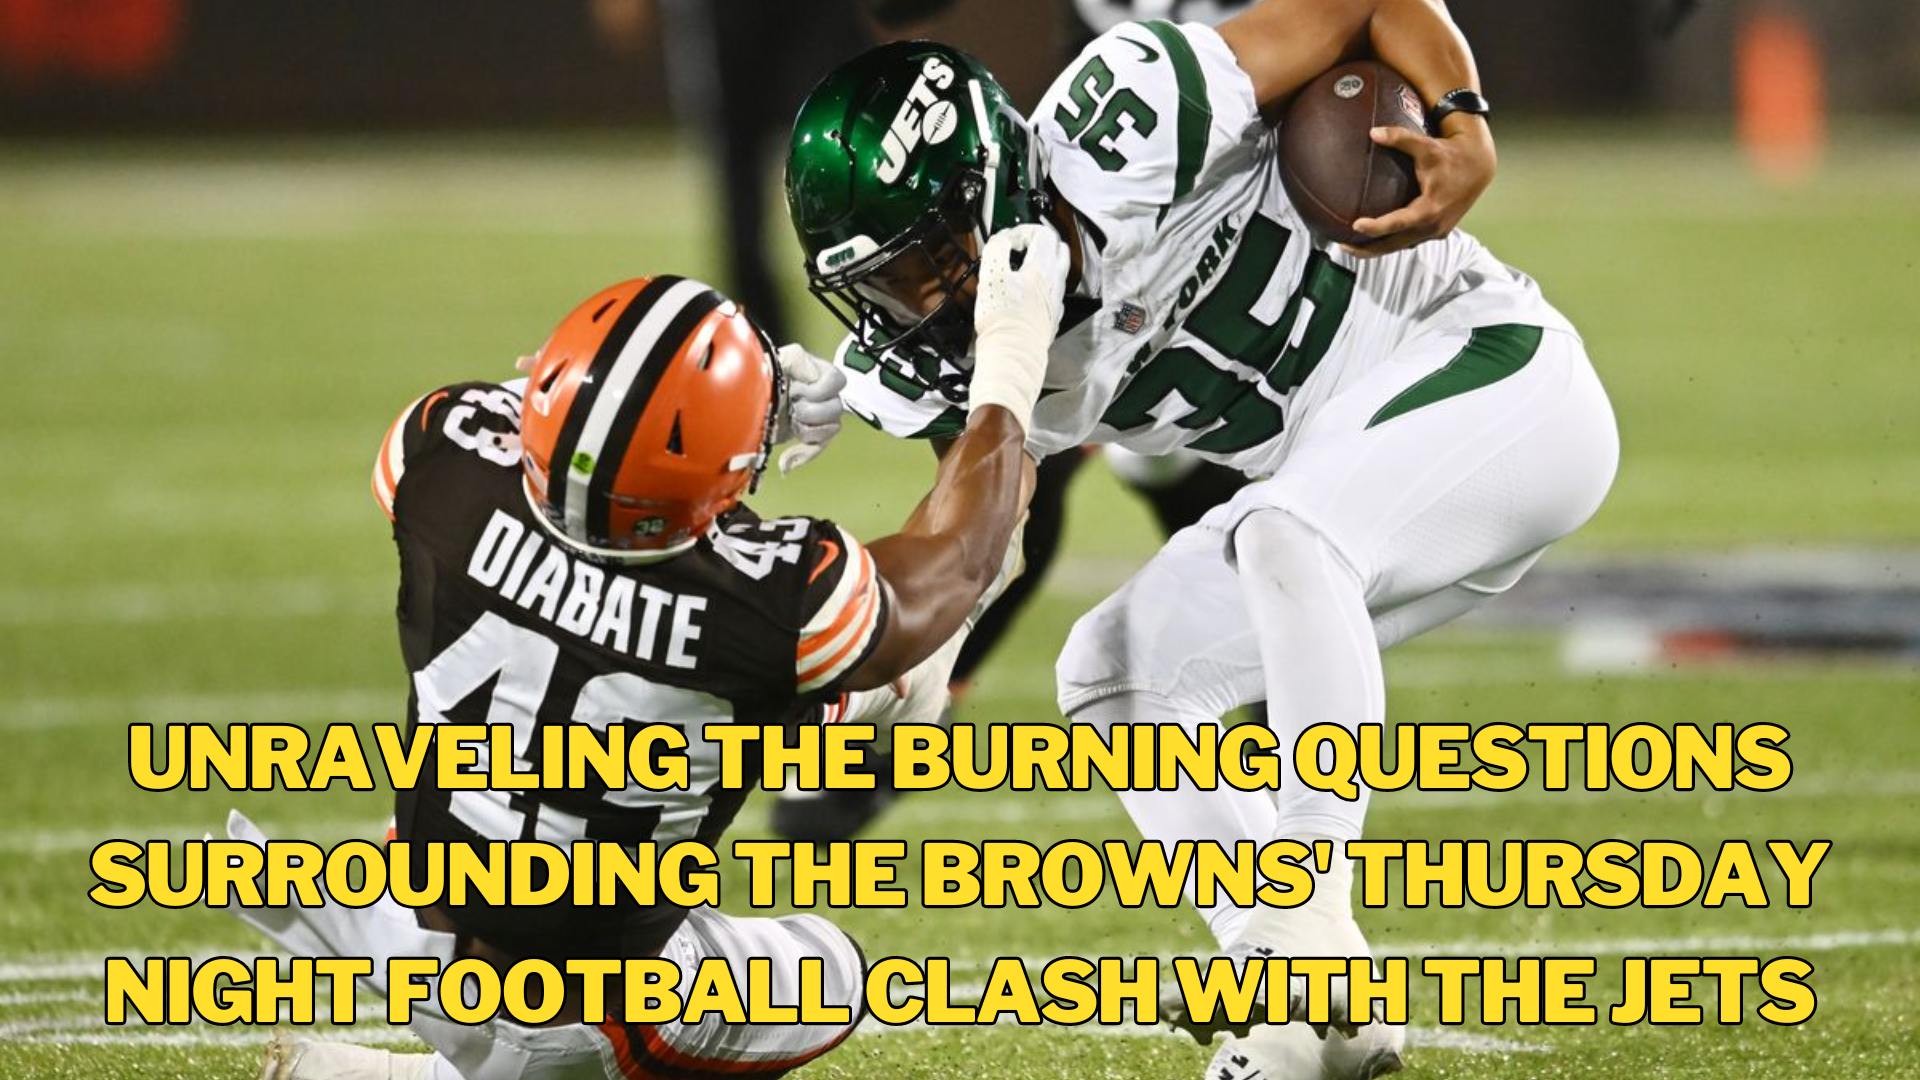 Browns Thursday Night Football Clash with the Jets, Buzzonnet